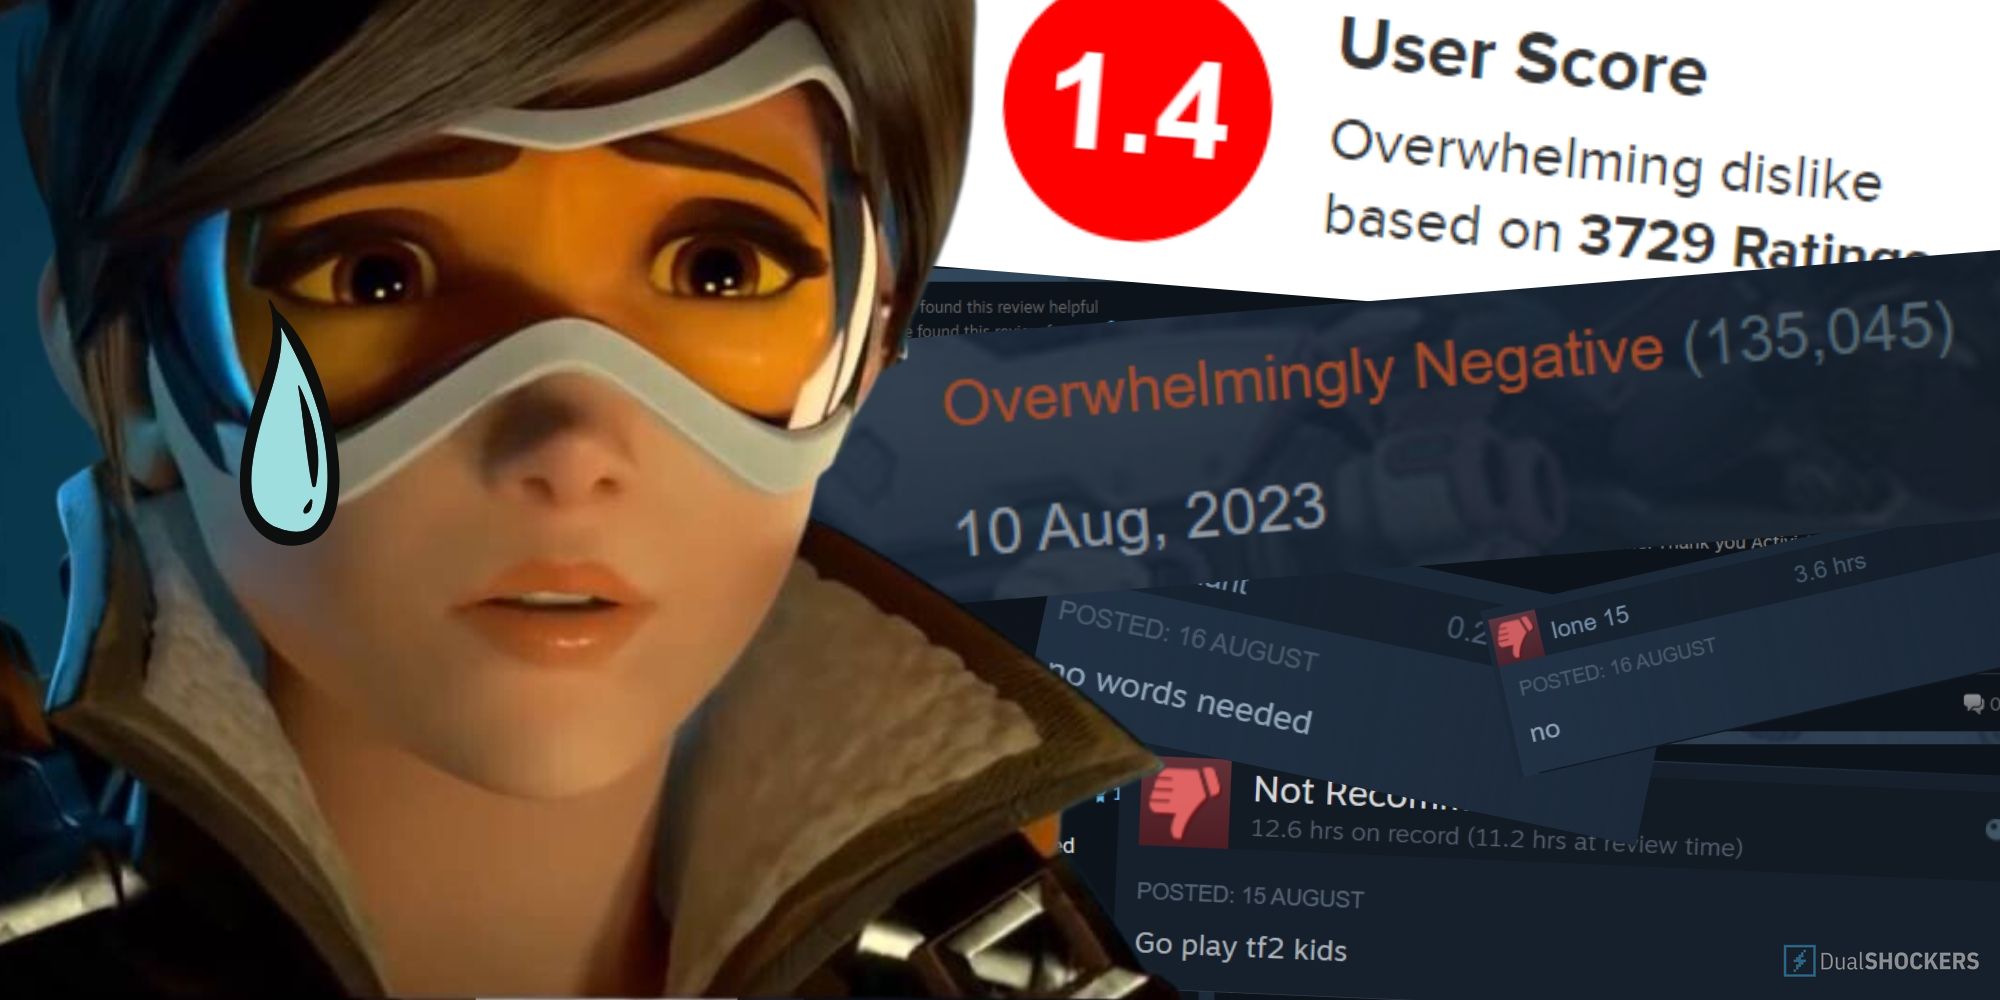 Overwatch 2's Steam debut is big, but those user reviews are rough